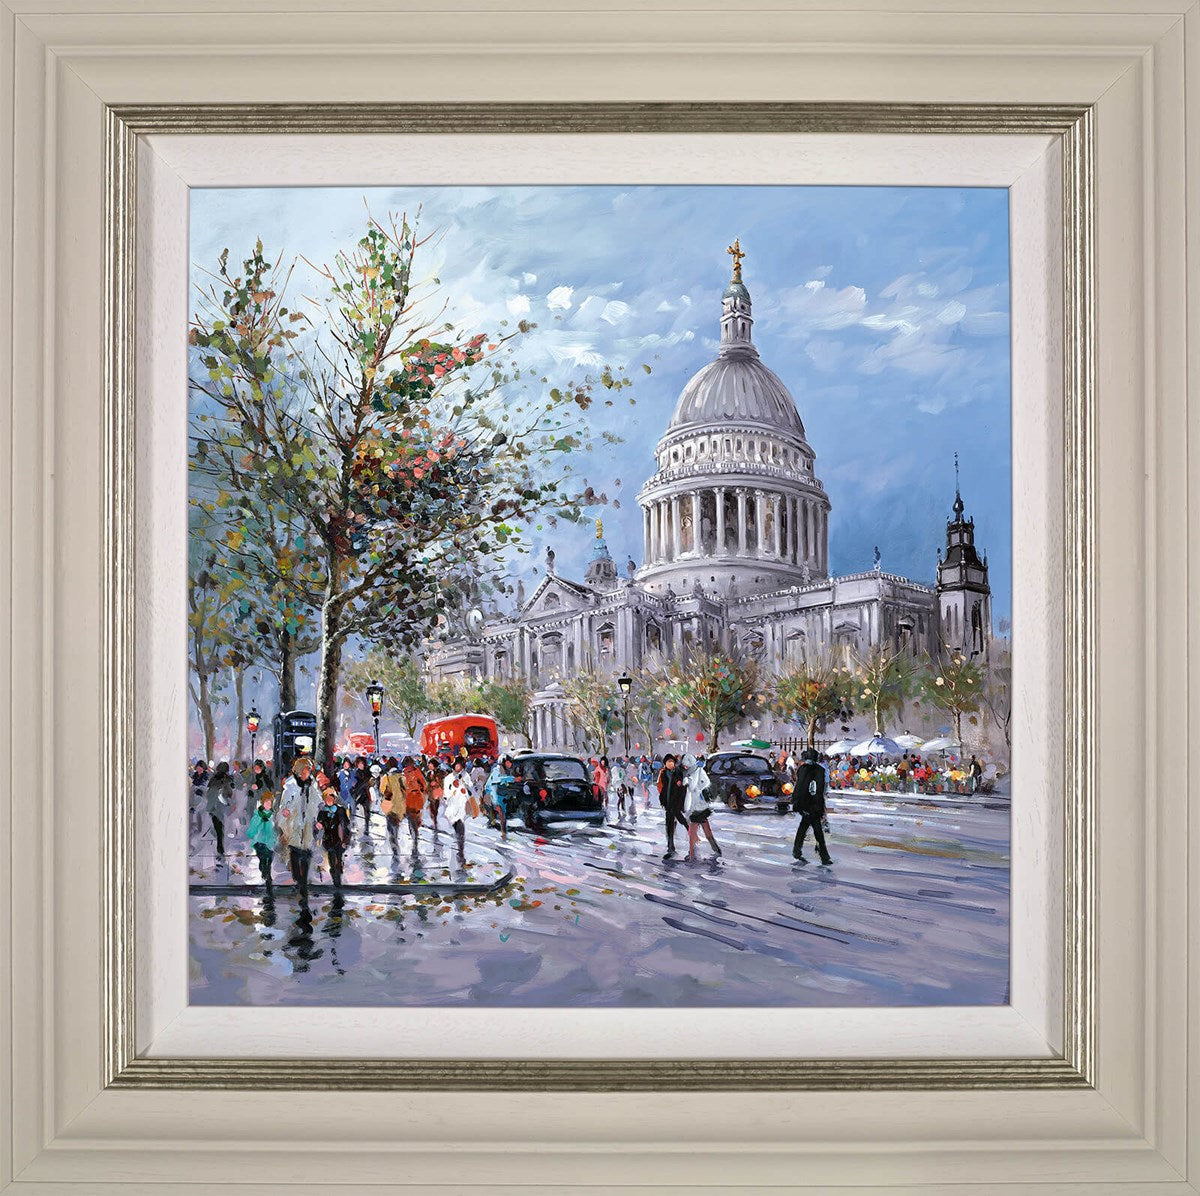 Heading to St Pauls by Henderson Cisz